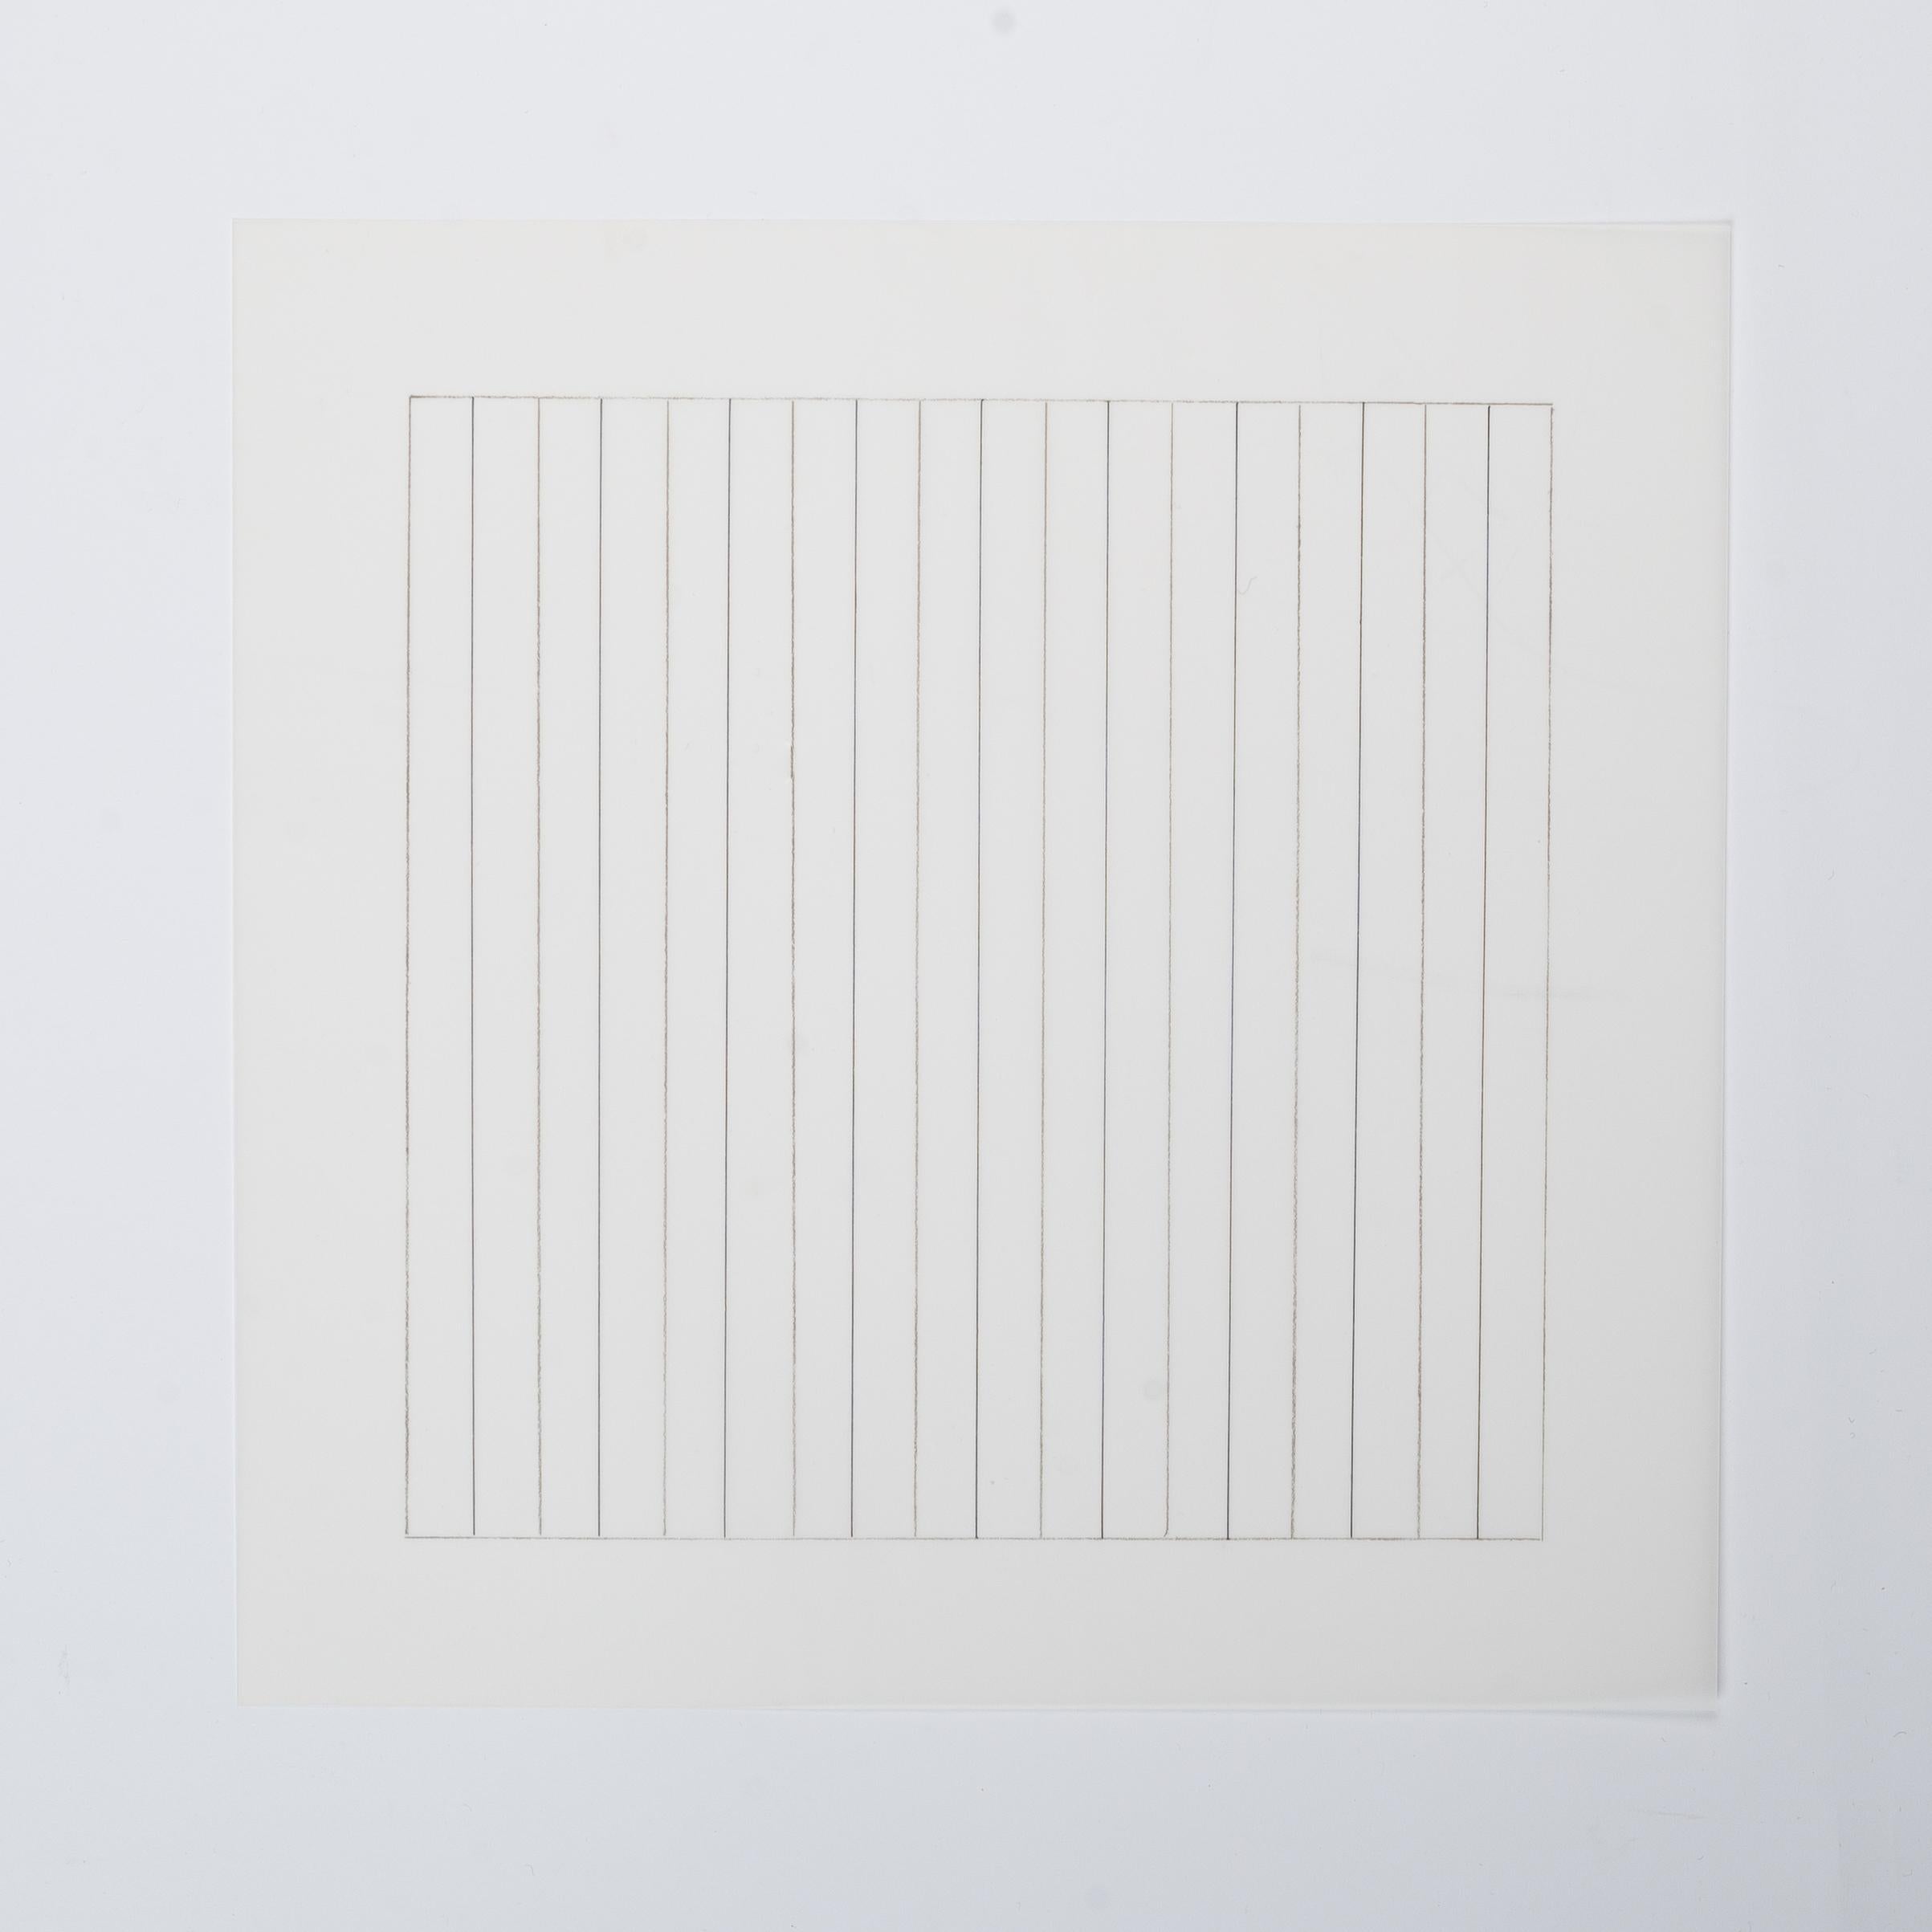 Agnes Martin, Set of 3 Lithographs from Untitled (from Paintings and Drawings) For Sale 3